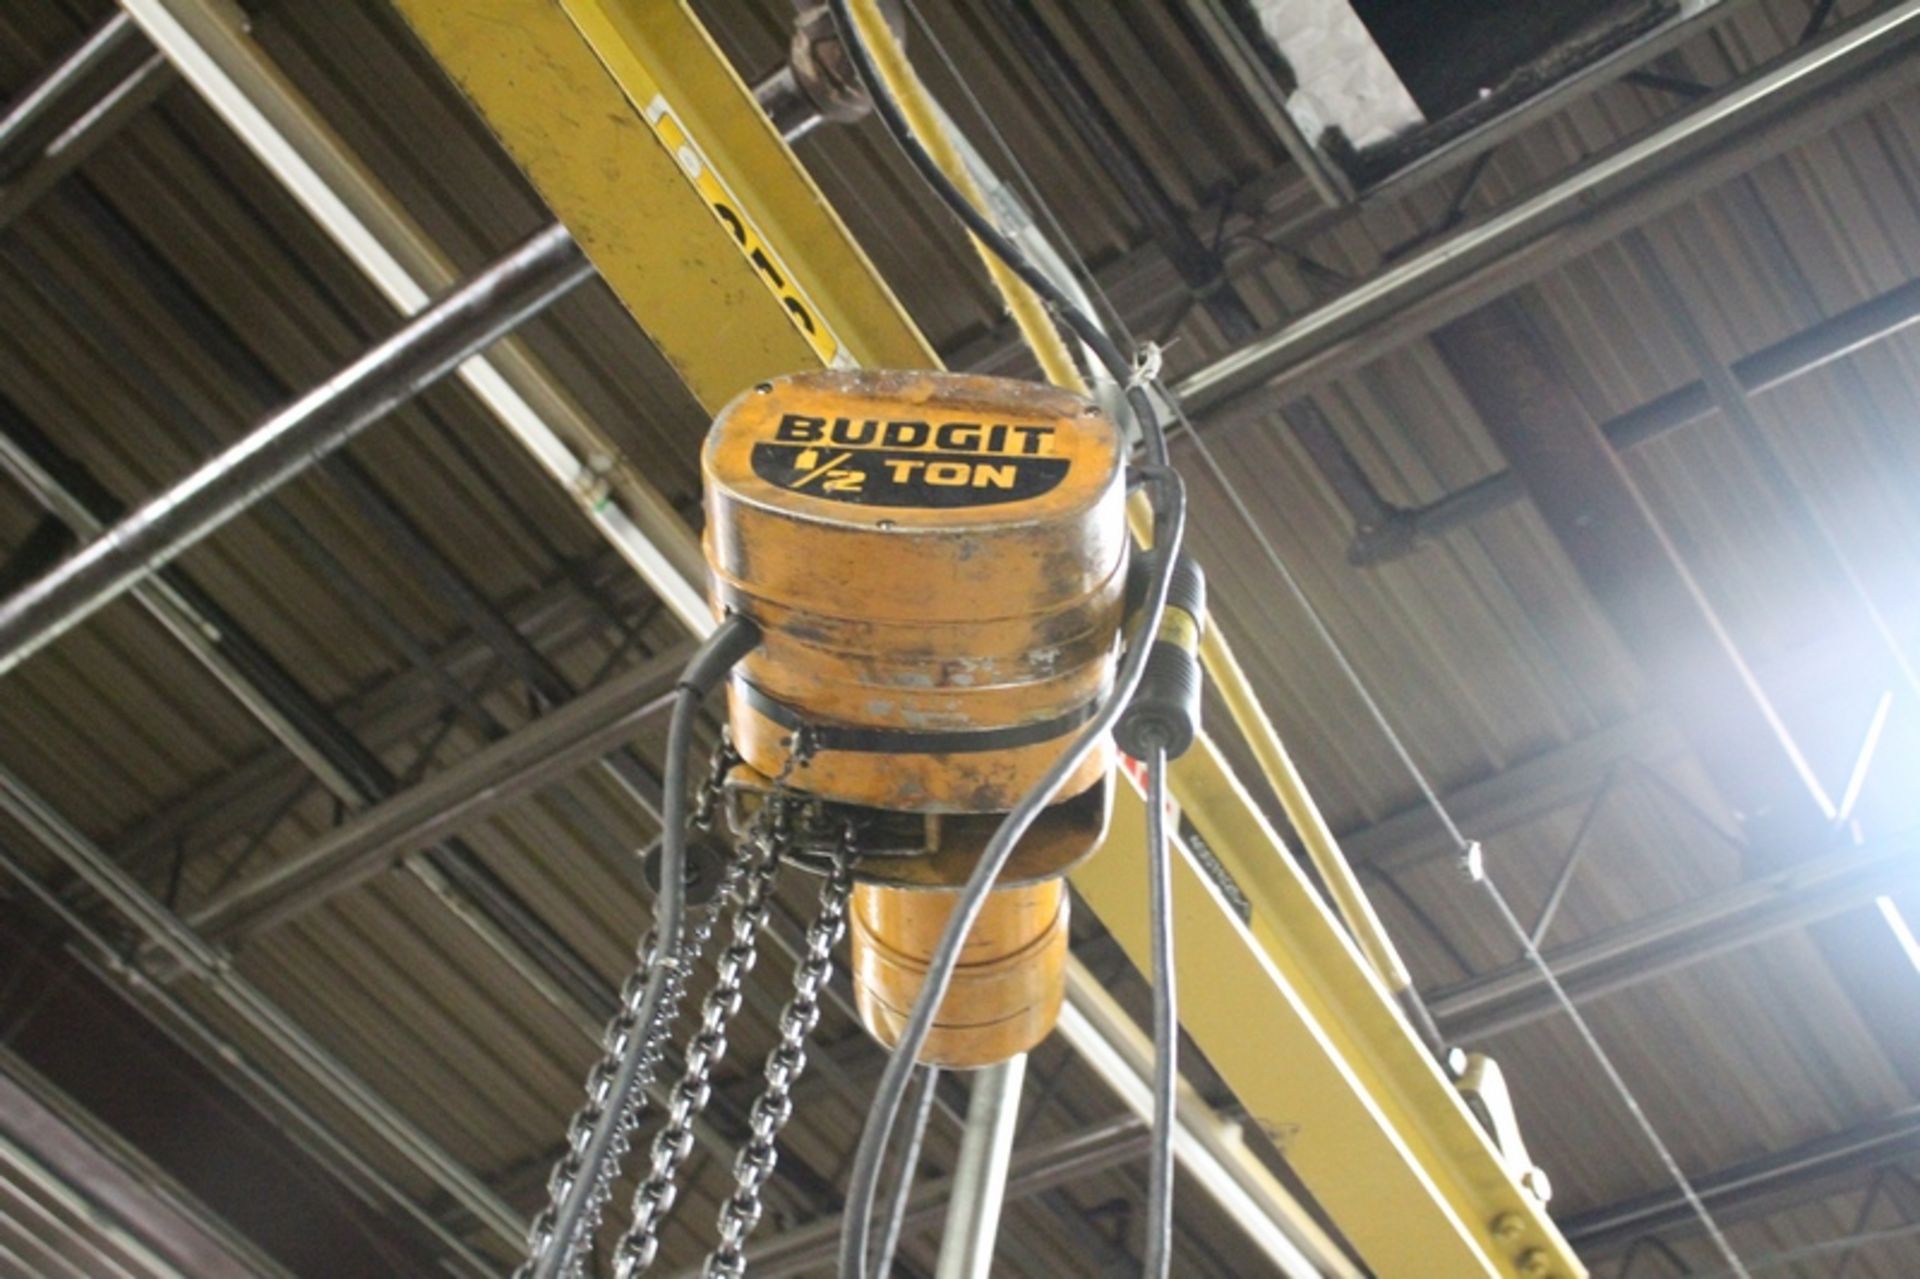 BEAM MOUNTED JIB CRANE, 138" ARM, WITH BUDGIT 1/2 TON ELECTIC CHAIN HOIST WITH PENDANT WITH POST - Image 2 of 2